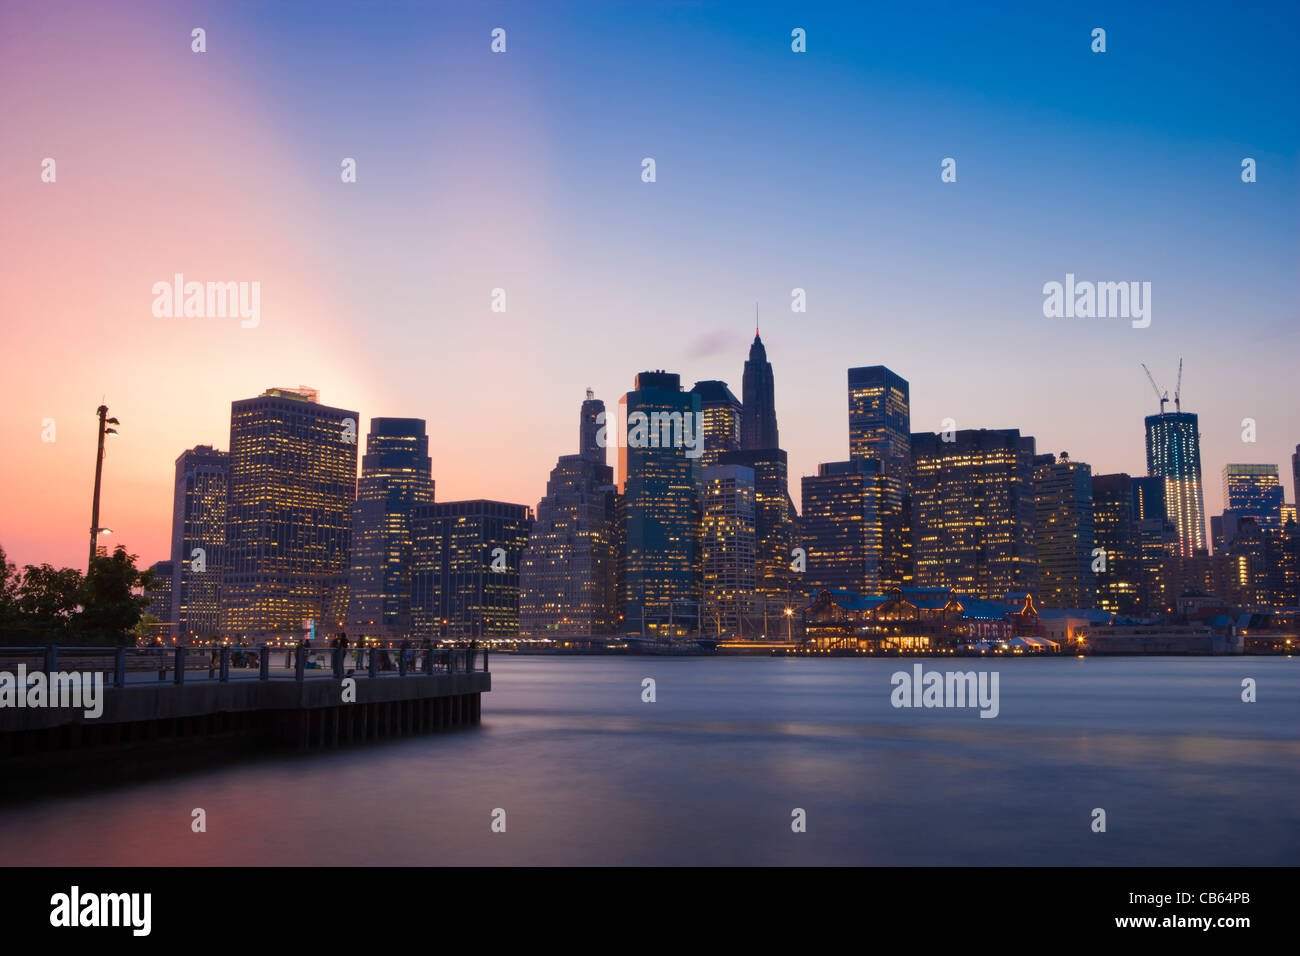 The Freedom Tower Rises in the New York Skyline Stock Photo